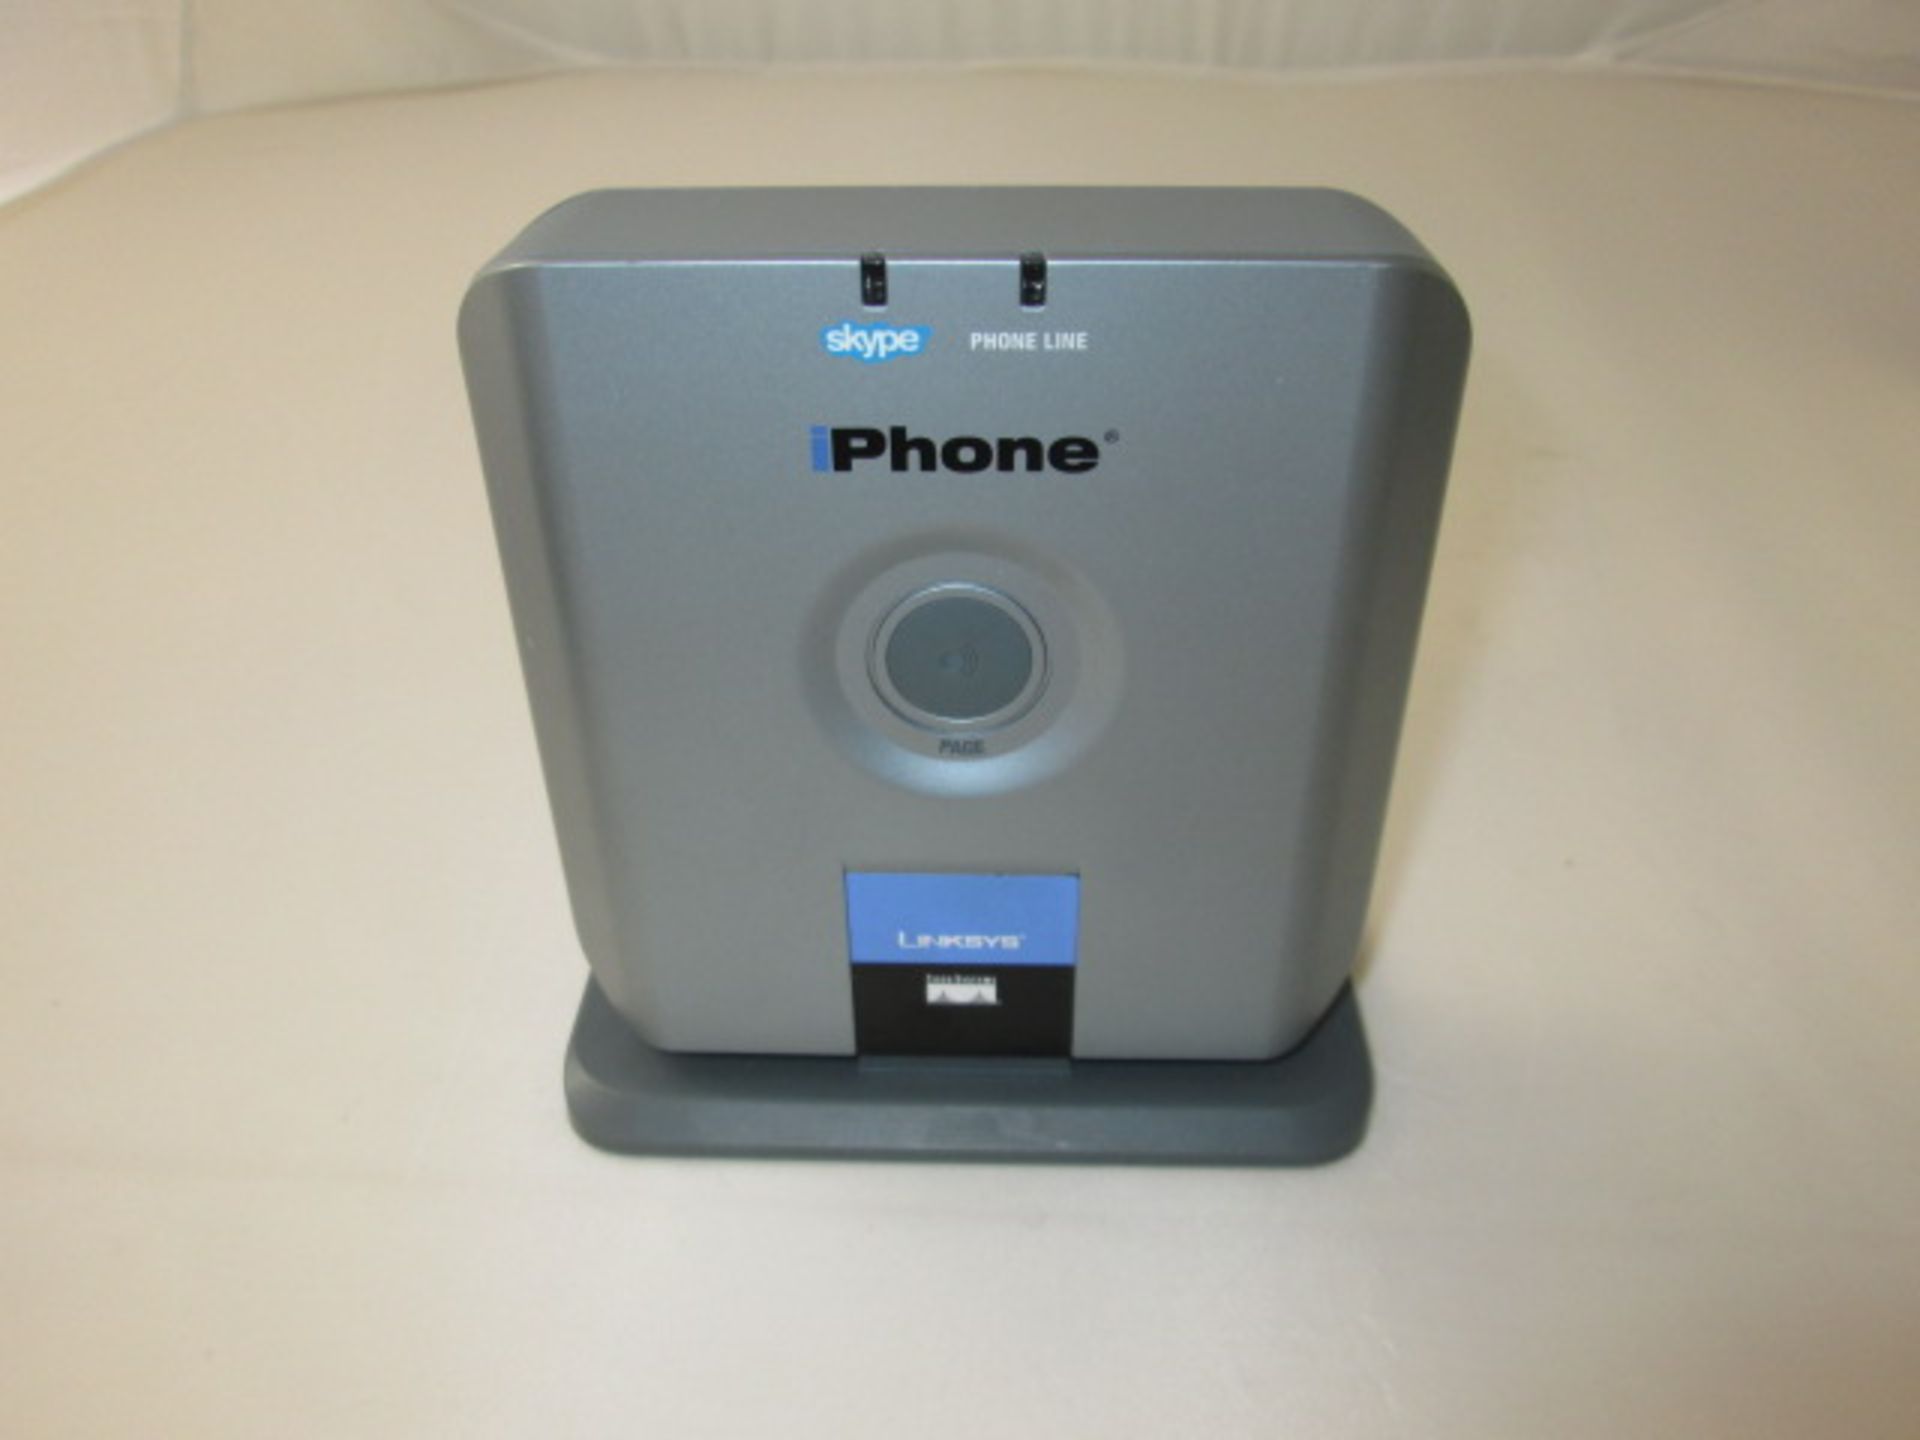 Linksys Cordless Dual Mode Internet Telephony Kit, Model CIT300. Complete with Handset, Charger with - Image 3 of 3